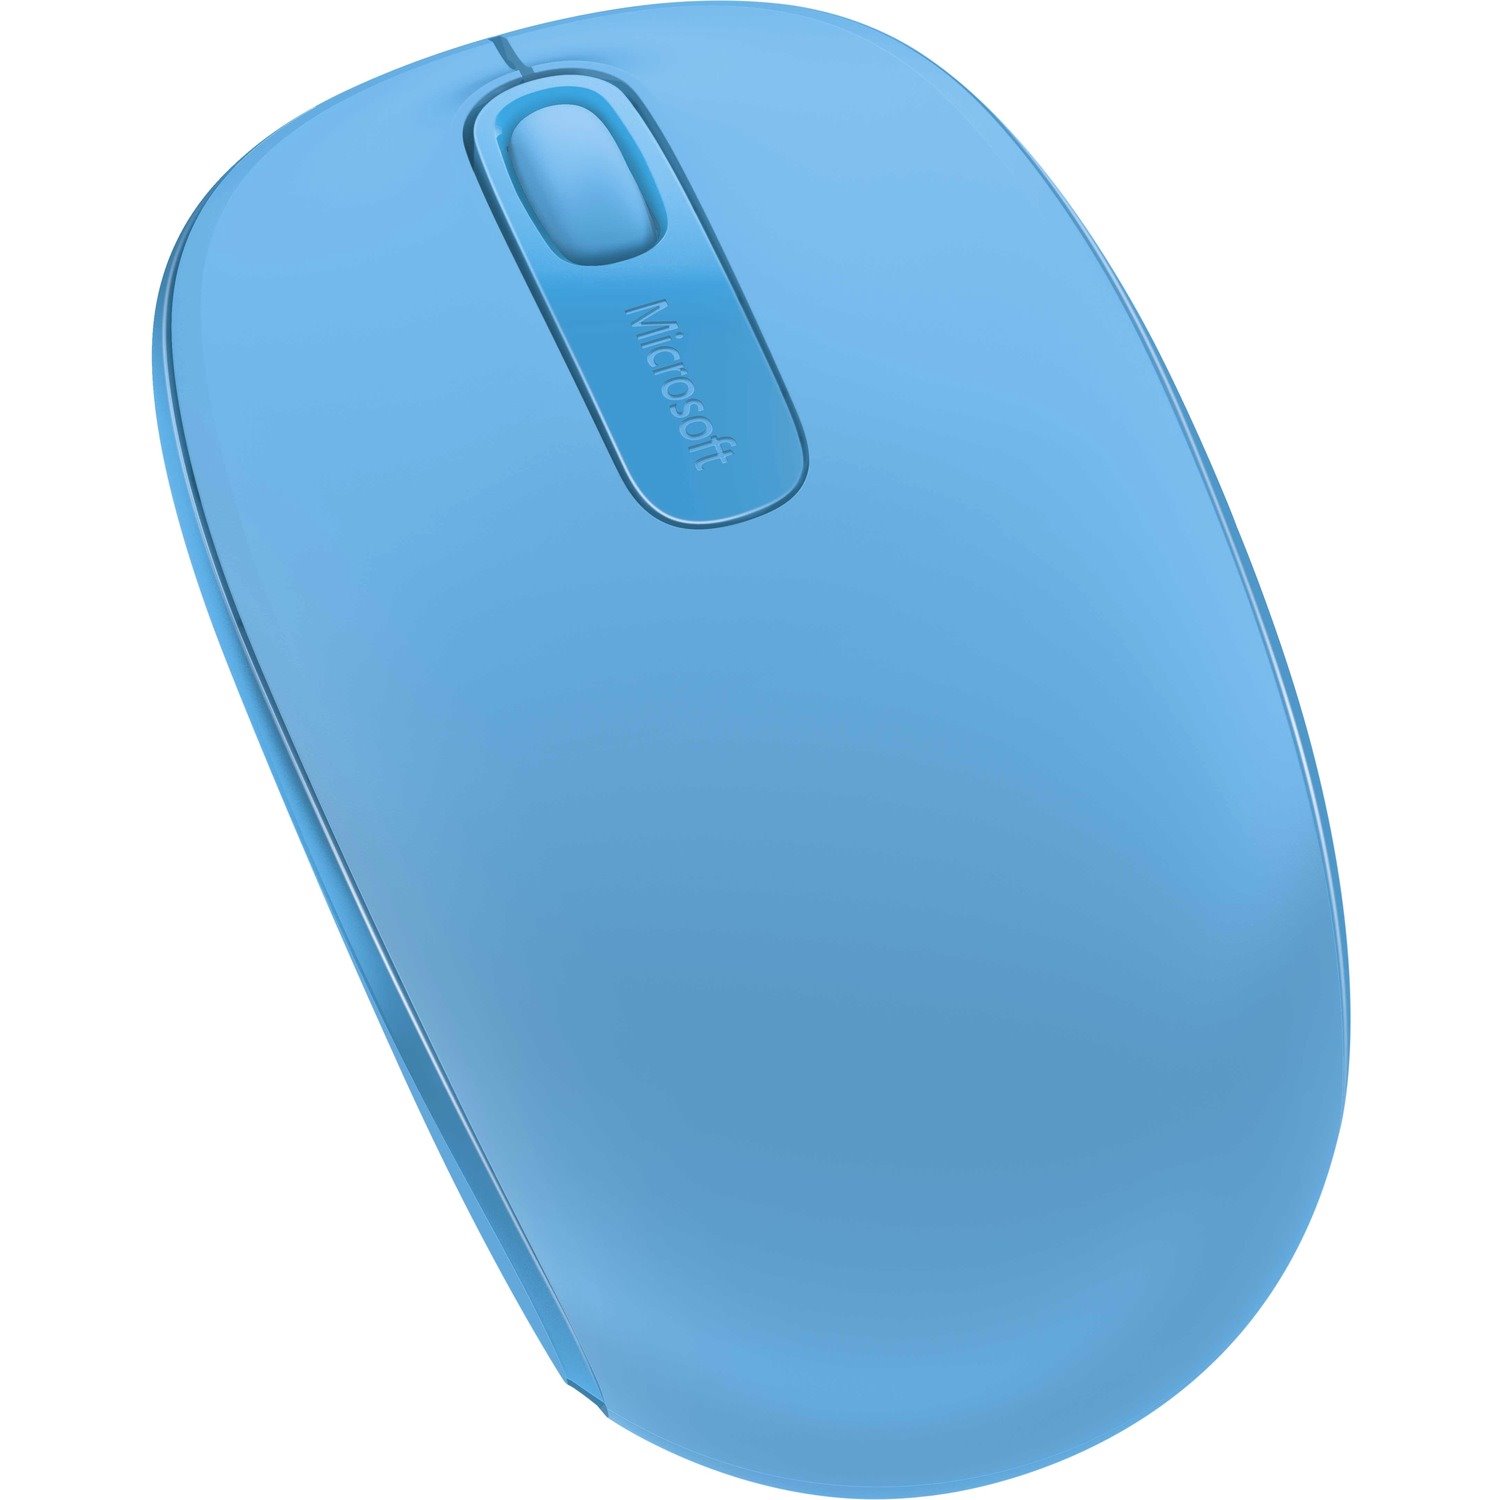 Microsoft Wireless Mobile 1850 Mouse - Radio Frequency - USB 2.0 - Optical - 3 Button(s) - Cyan Blue